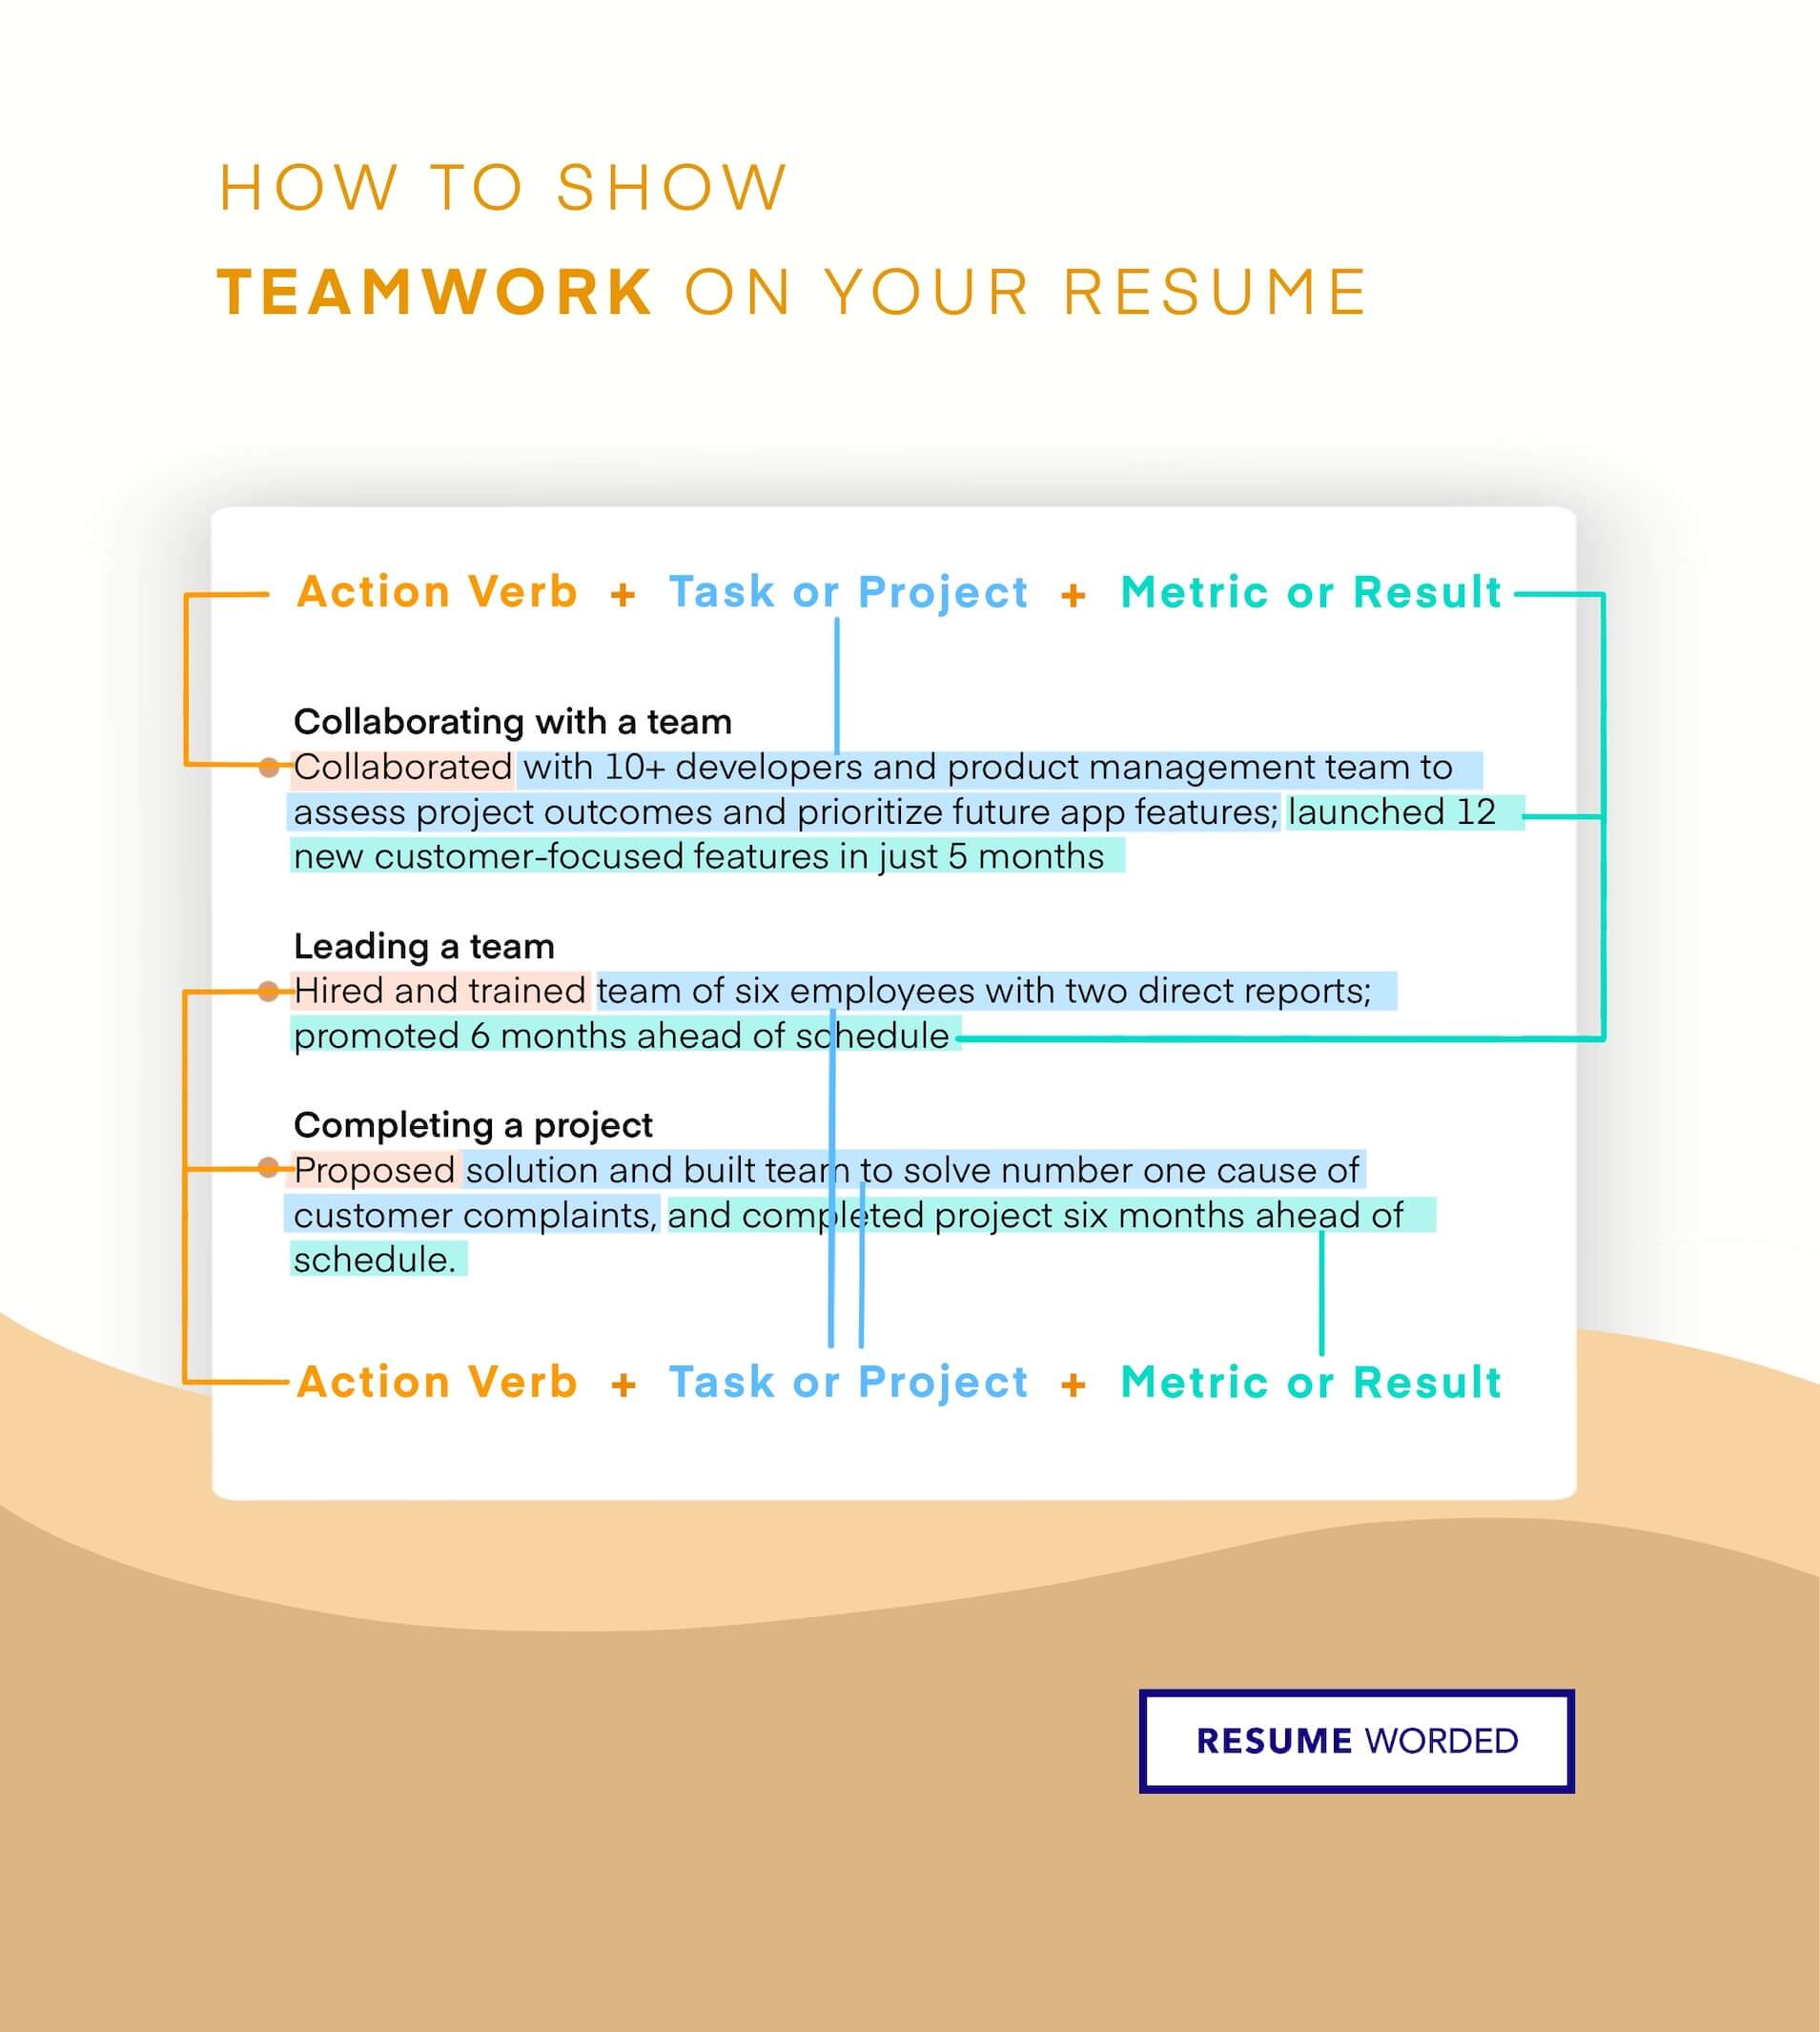 Show your experience managing teams in a financial setting - Director of Accounting Resume